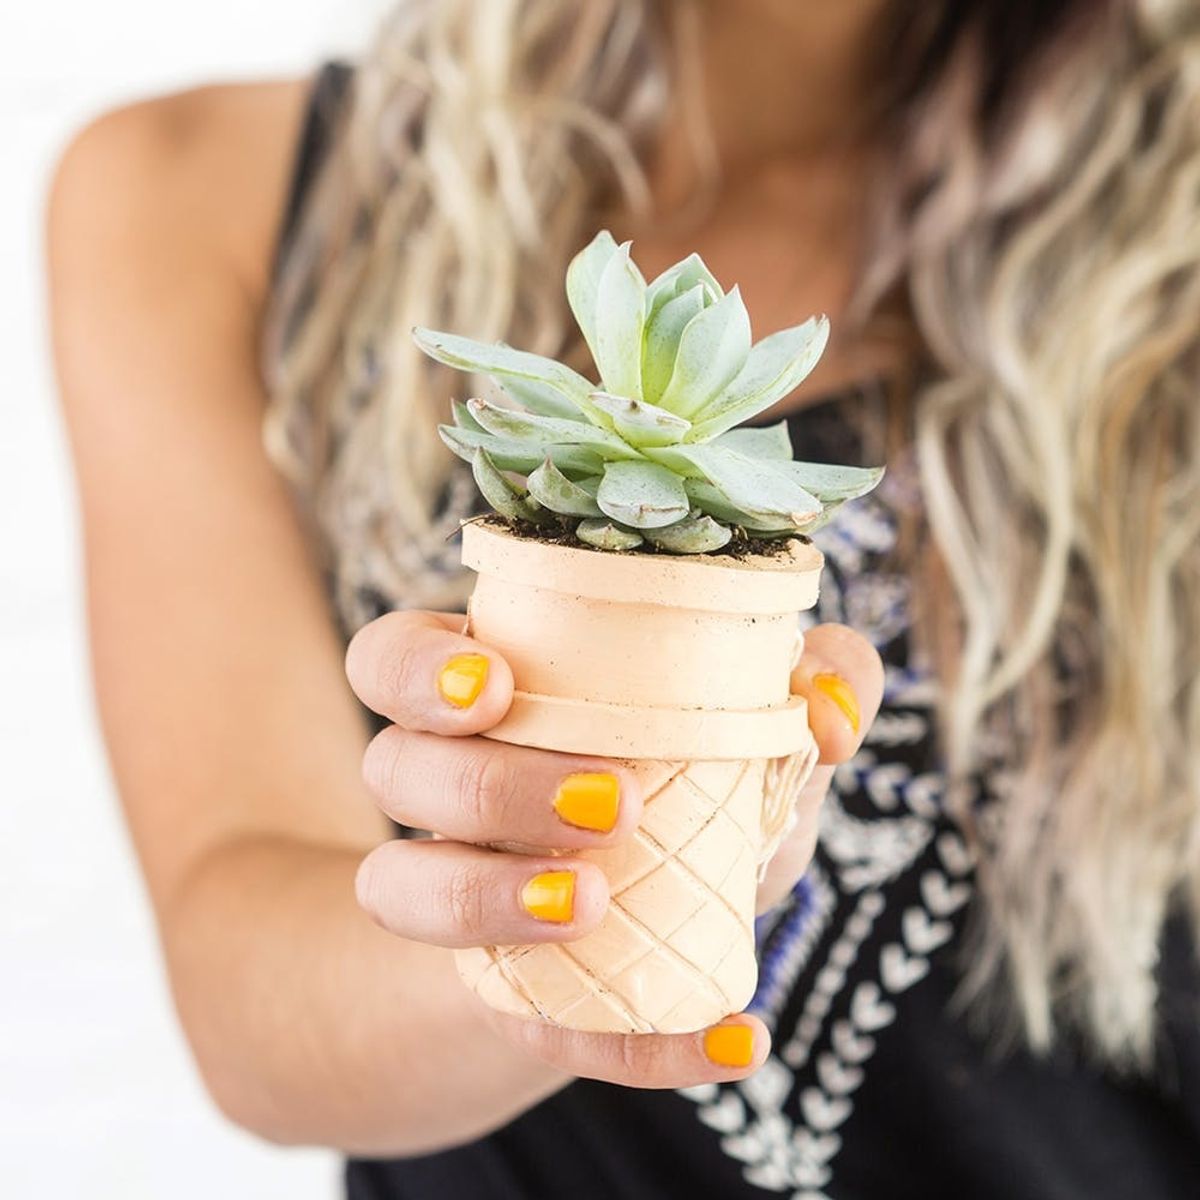 Make These Clay Ice Cream Cone Planters for Under $10